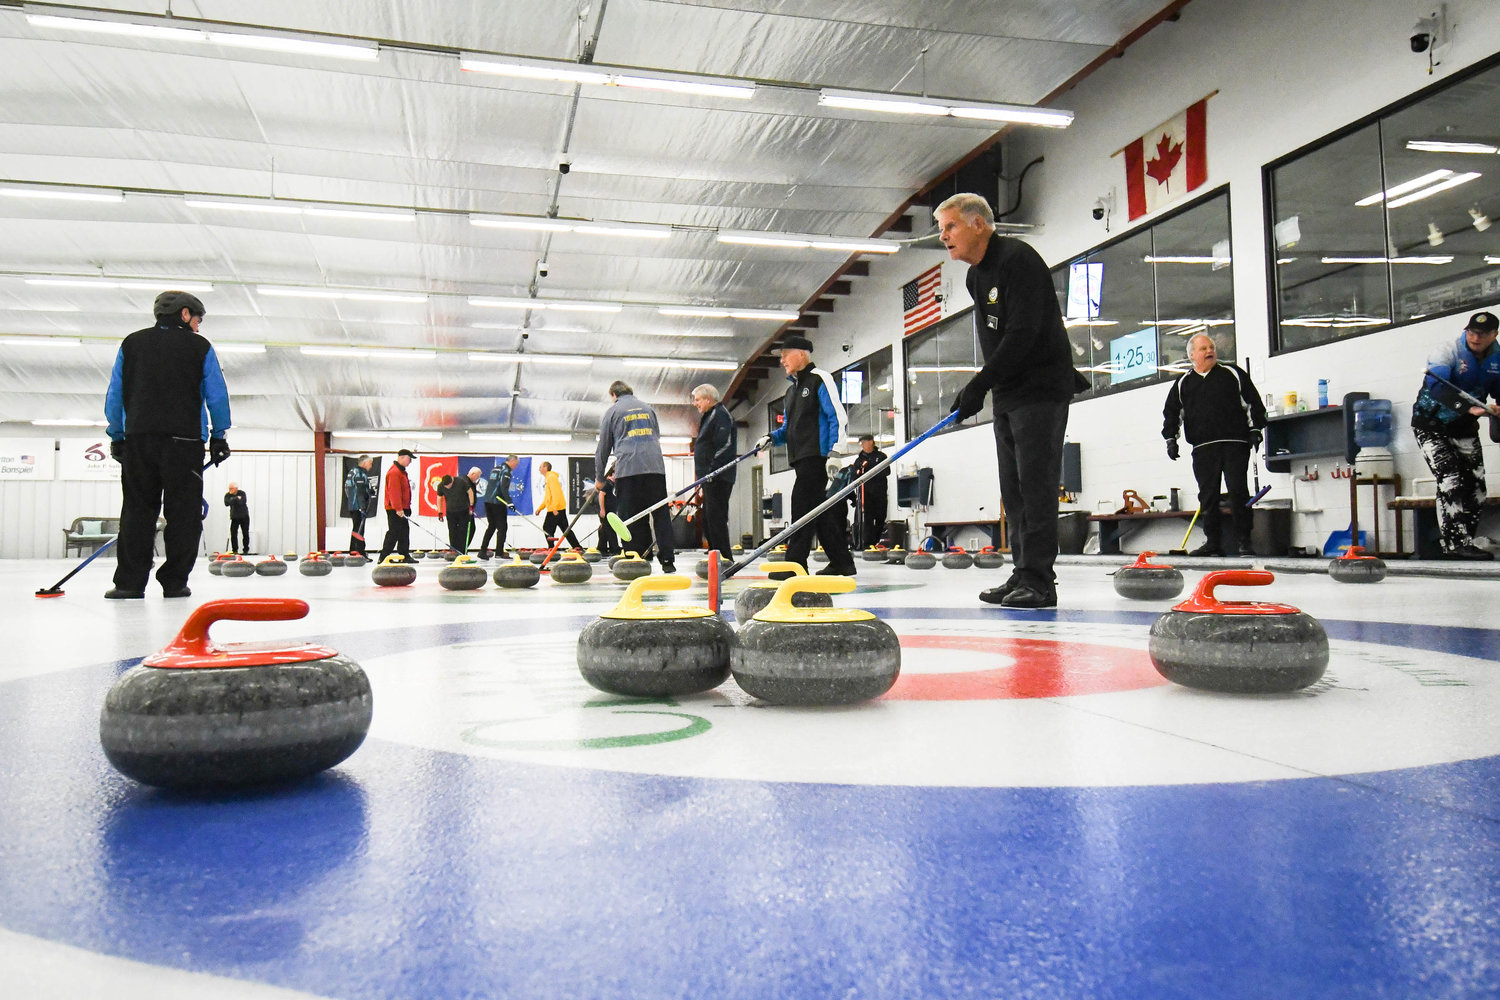 Teams compete in the 53rd annual Ross Tarlton International Bonspiel on Friday afternoon at the Utica Curling Club in Whitestown.